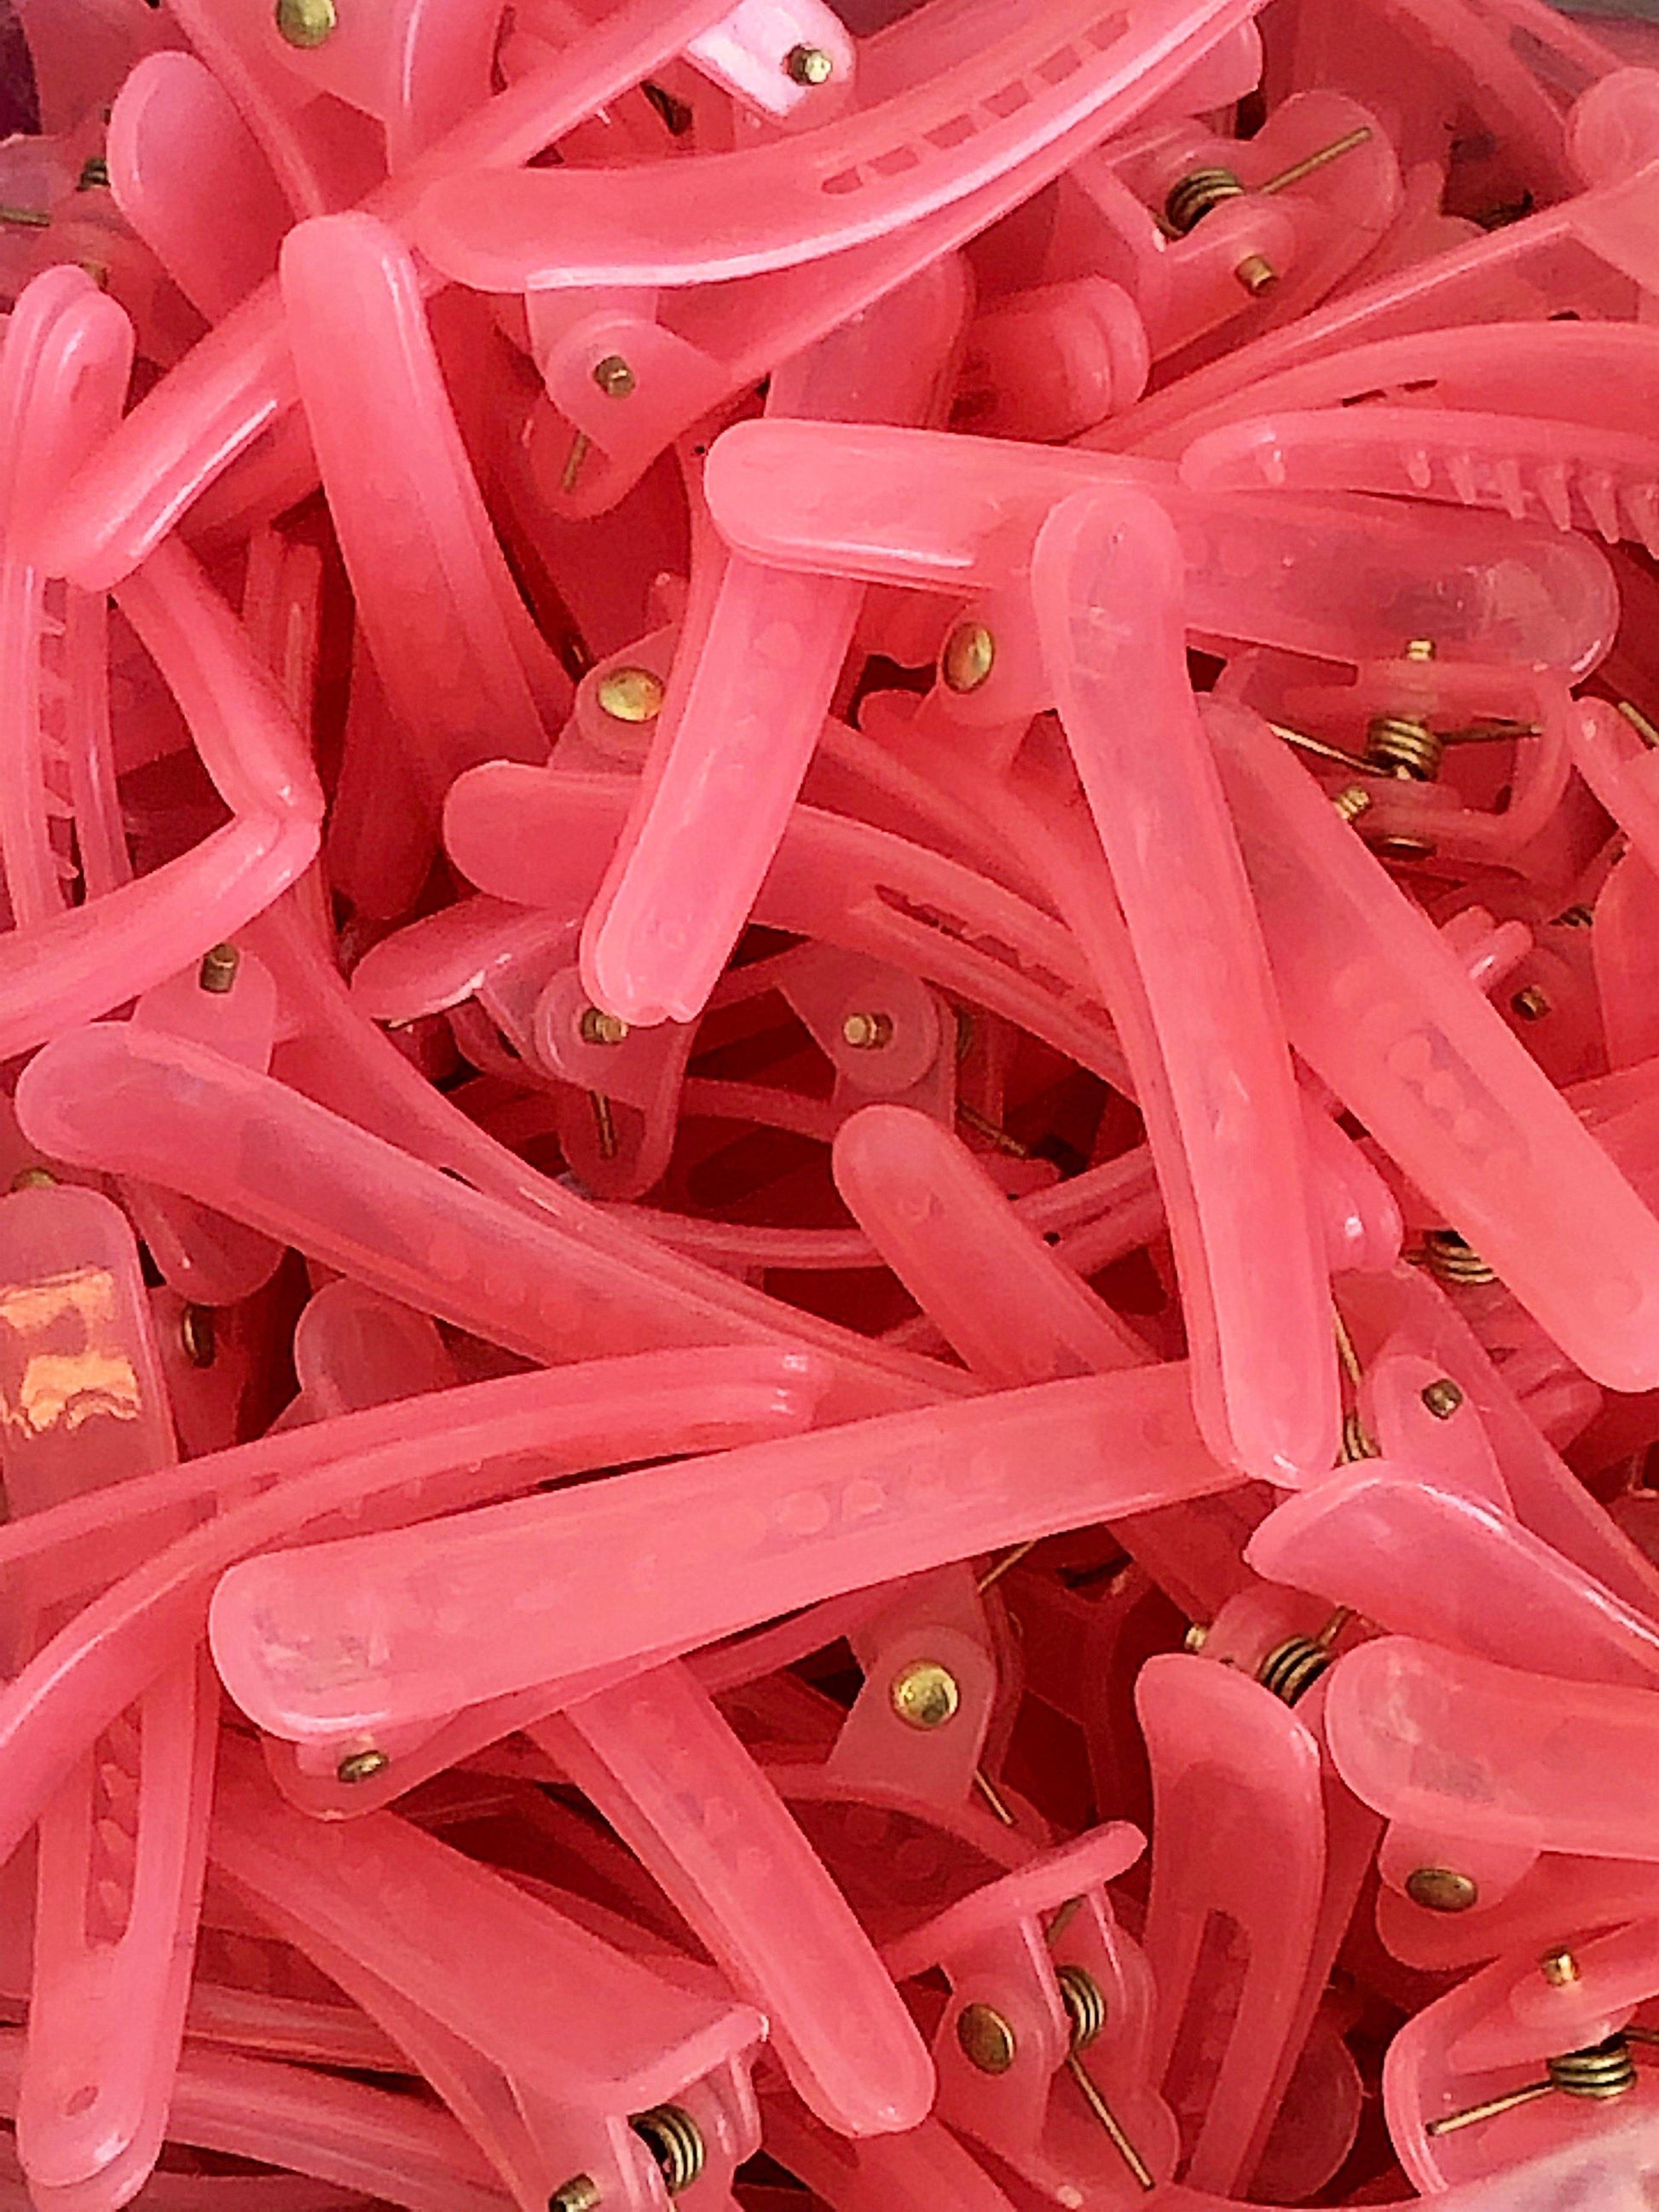 MINI Plastic Translucent Alligator Clips with Teeth 1" Set of 10 - Pretty in Pink Supply